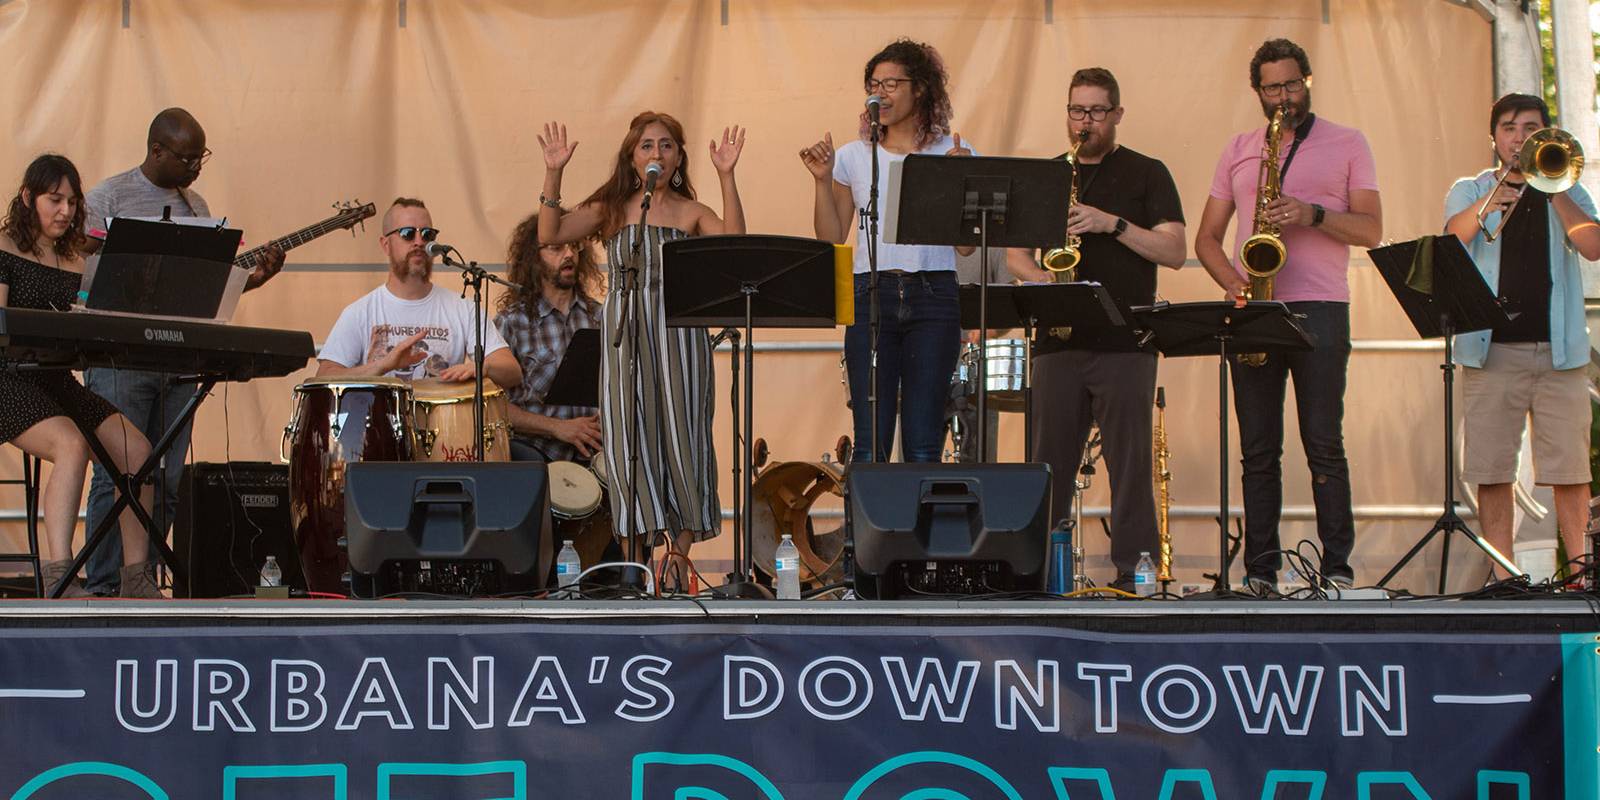 Check out some photos from Urbana’s Downtown Get Down